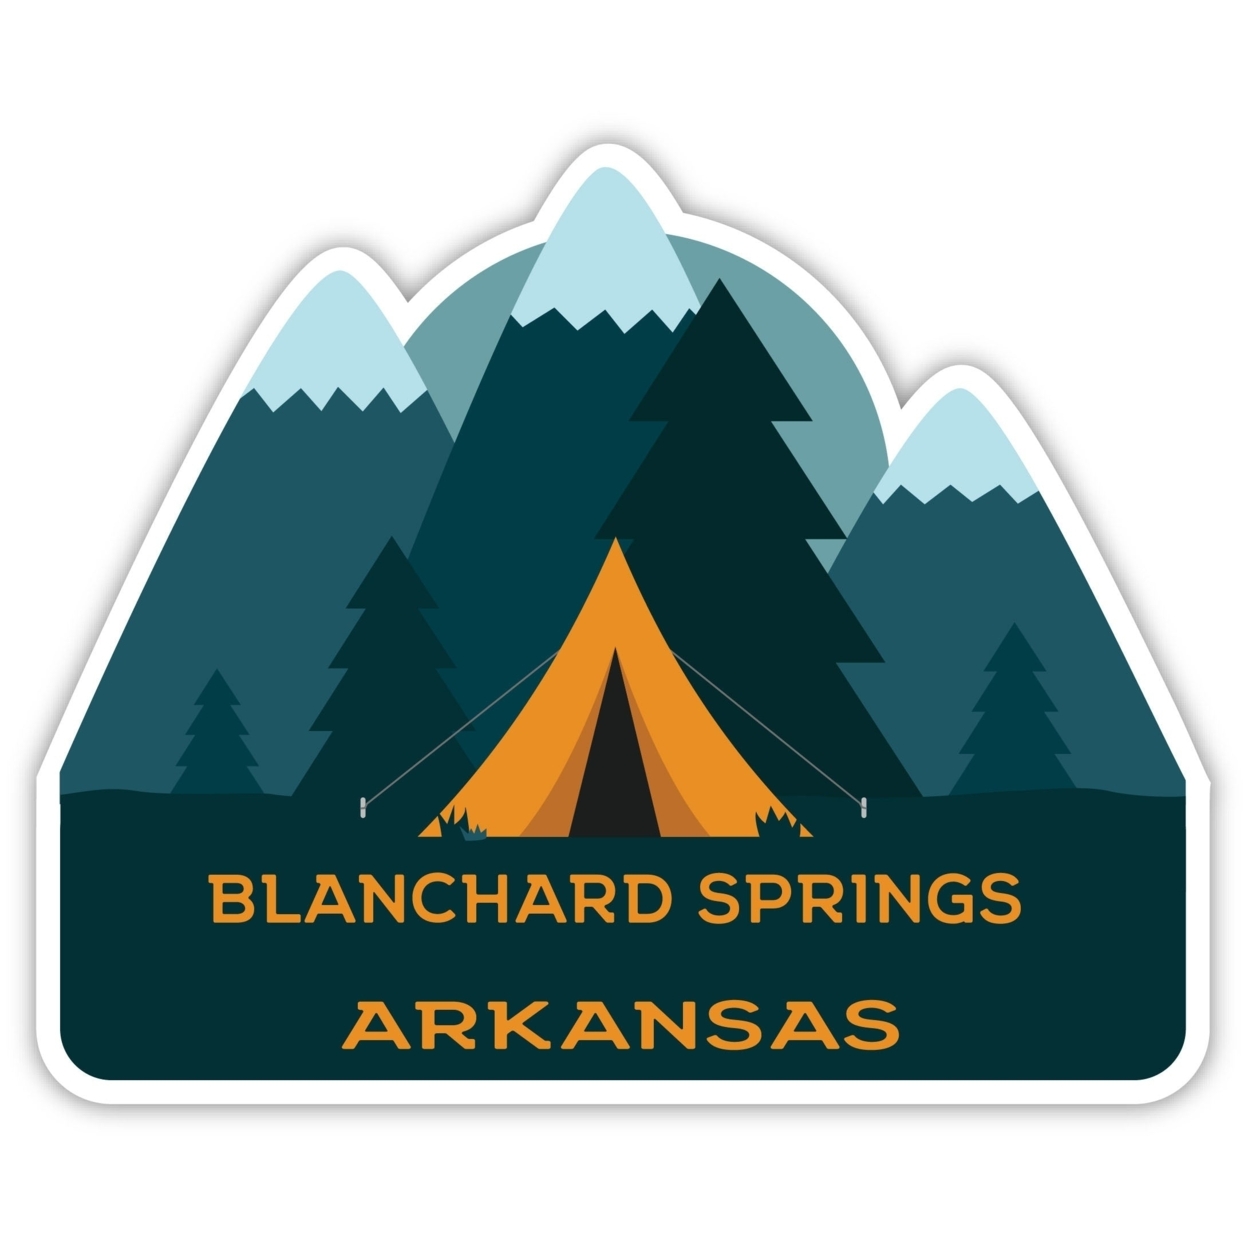 Blanchard Springs Arkansas Souvenir Decorative Stickers (Choose Theme And Size) - 4-Pack, 6-Inch, Camp Life